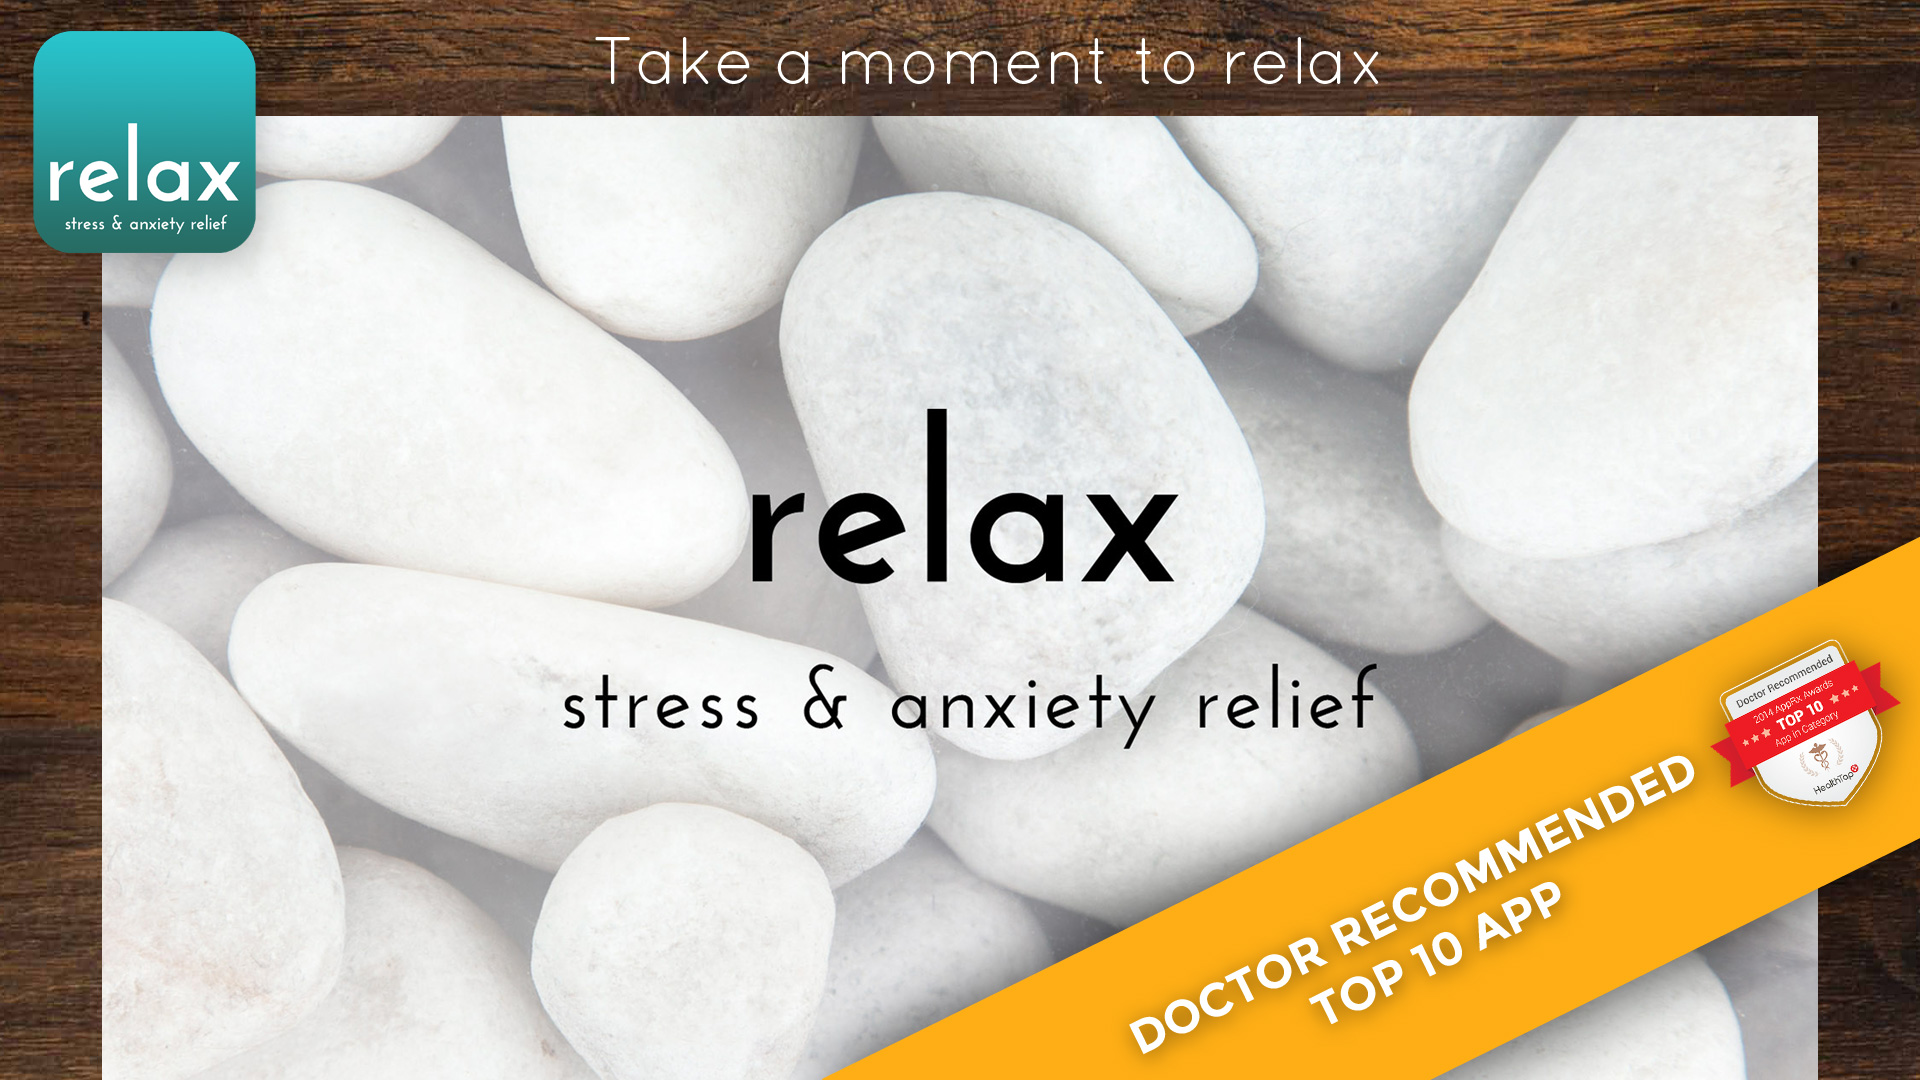 Relax not stress. Take this moment